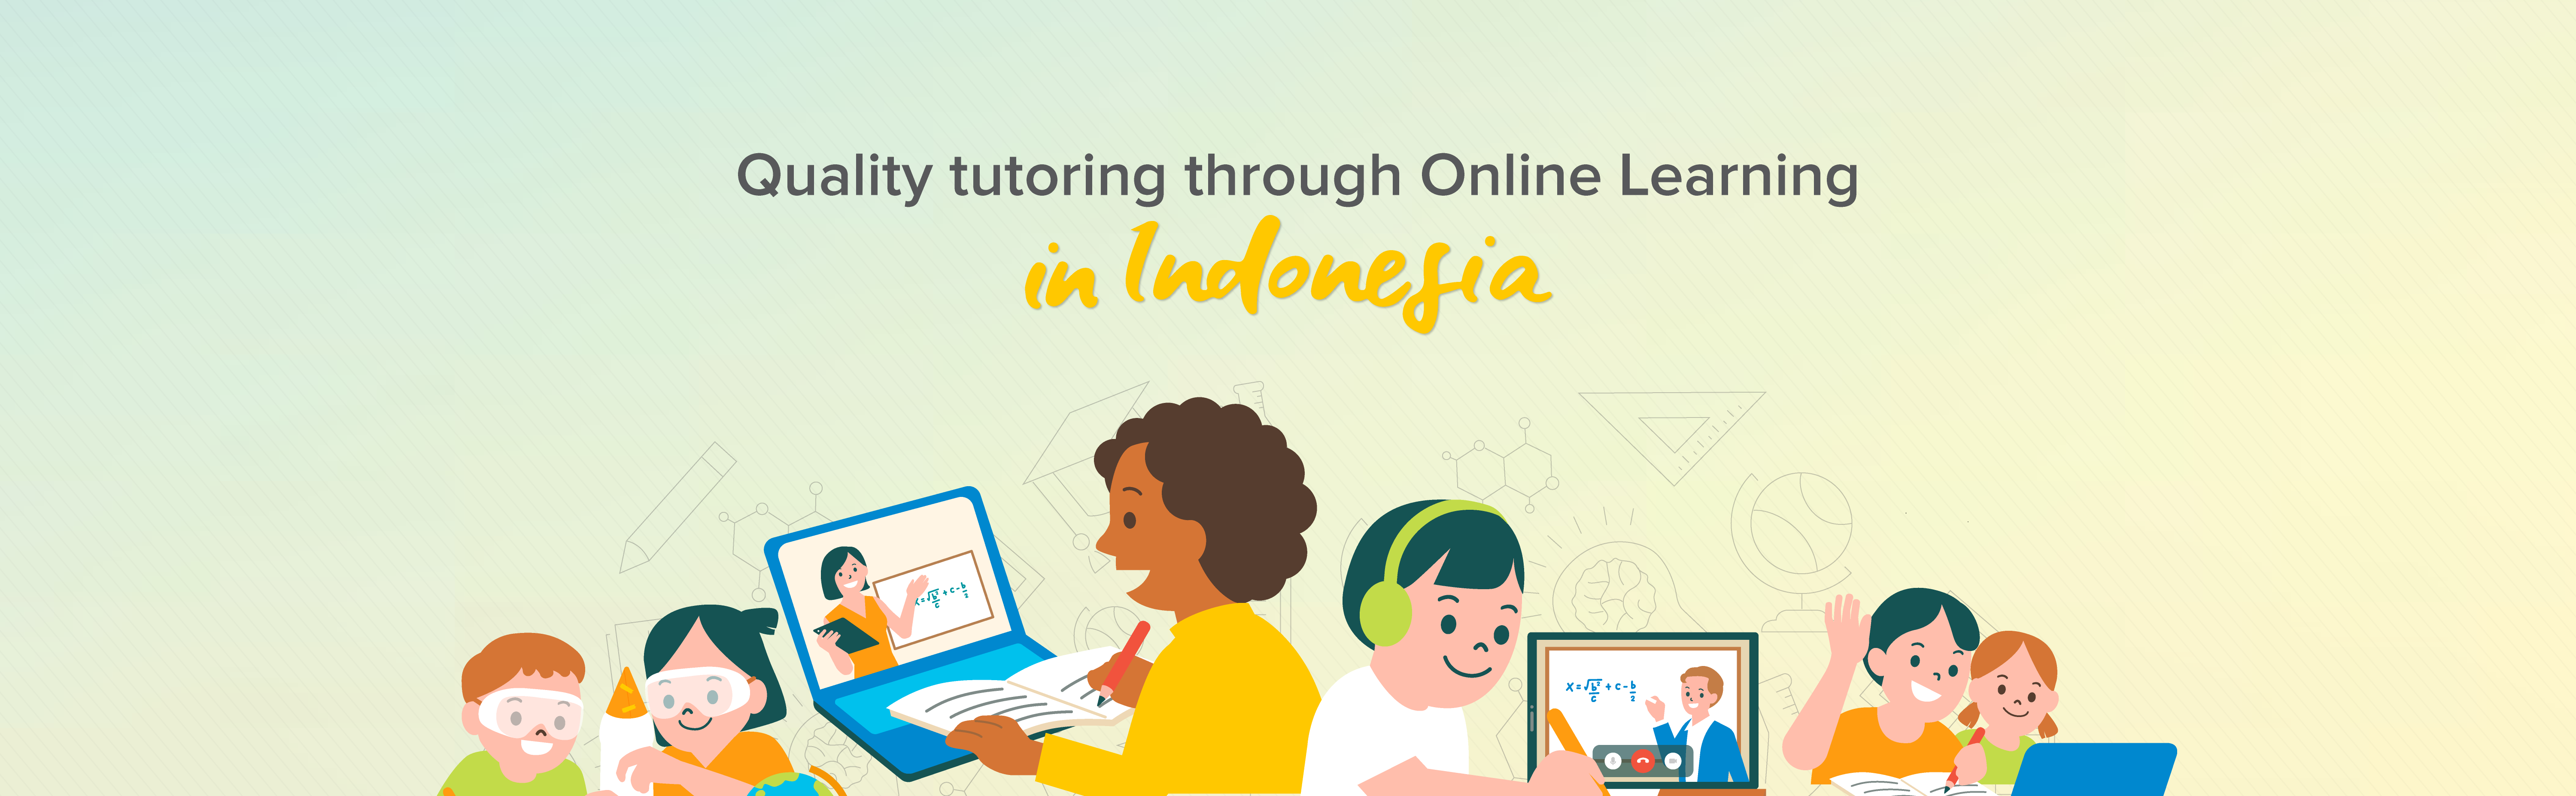 online learning in indonesia